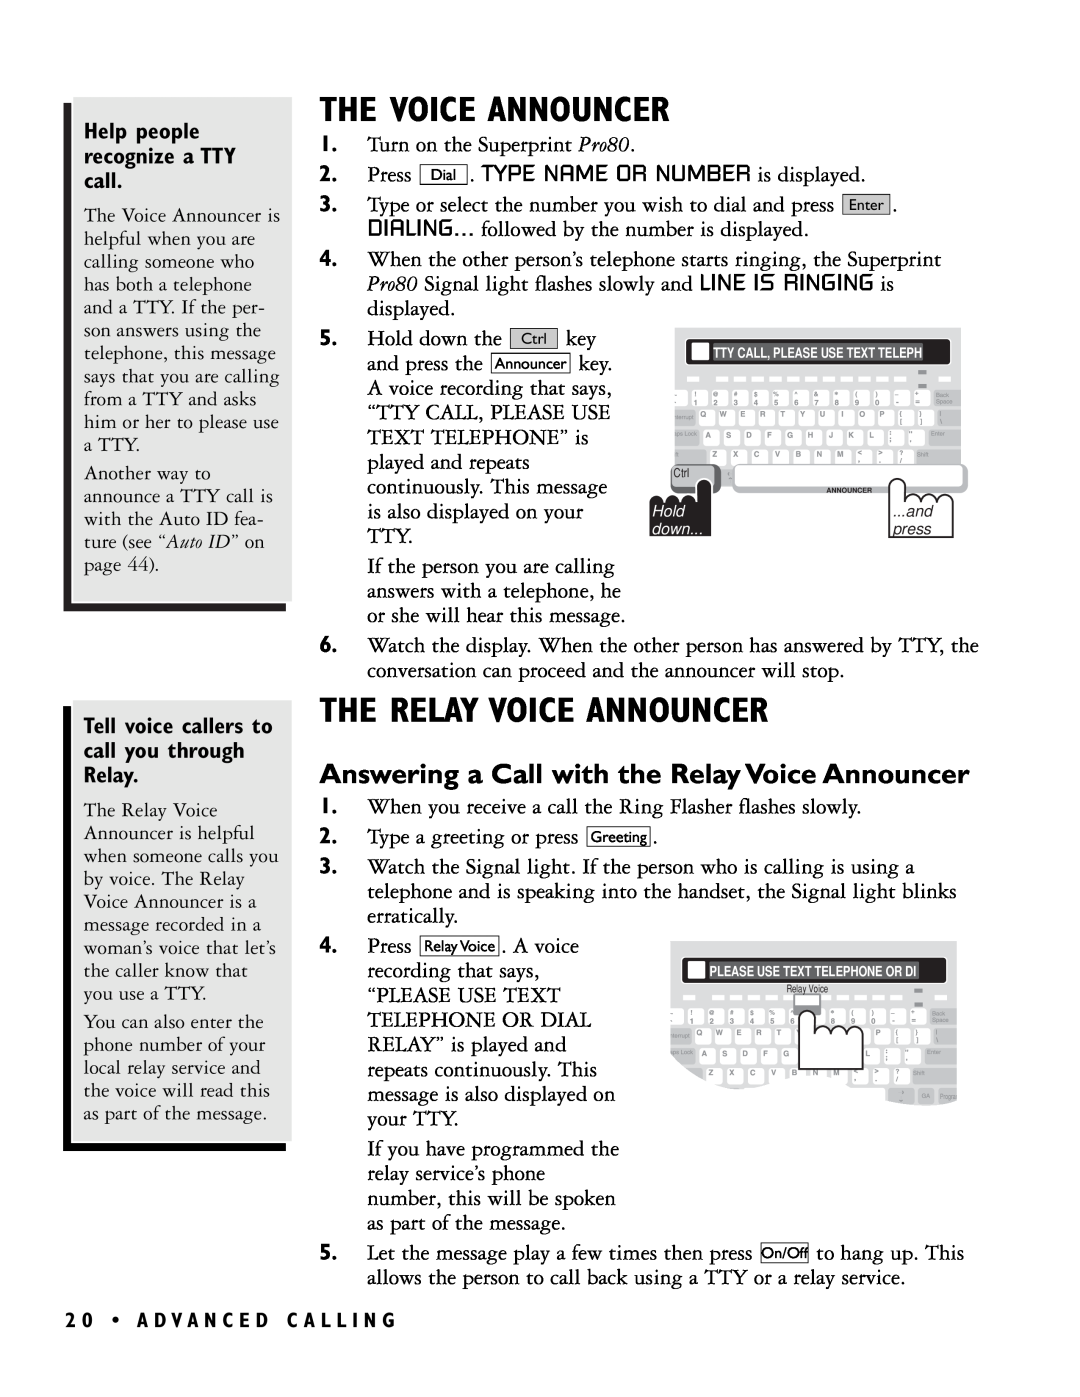 Ultratec PRO80TM manual The Voice Announcer, The Relay Voice Announcer, Answering a Call with the Relay Voice Announcer 